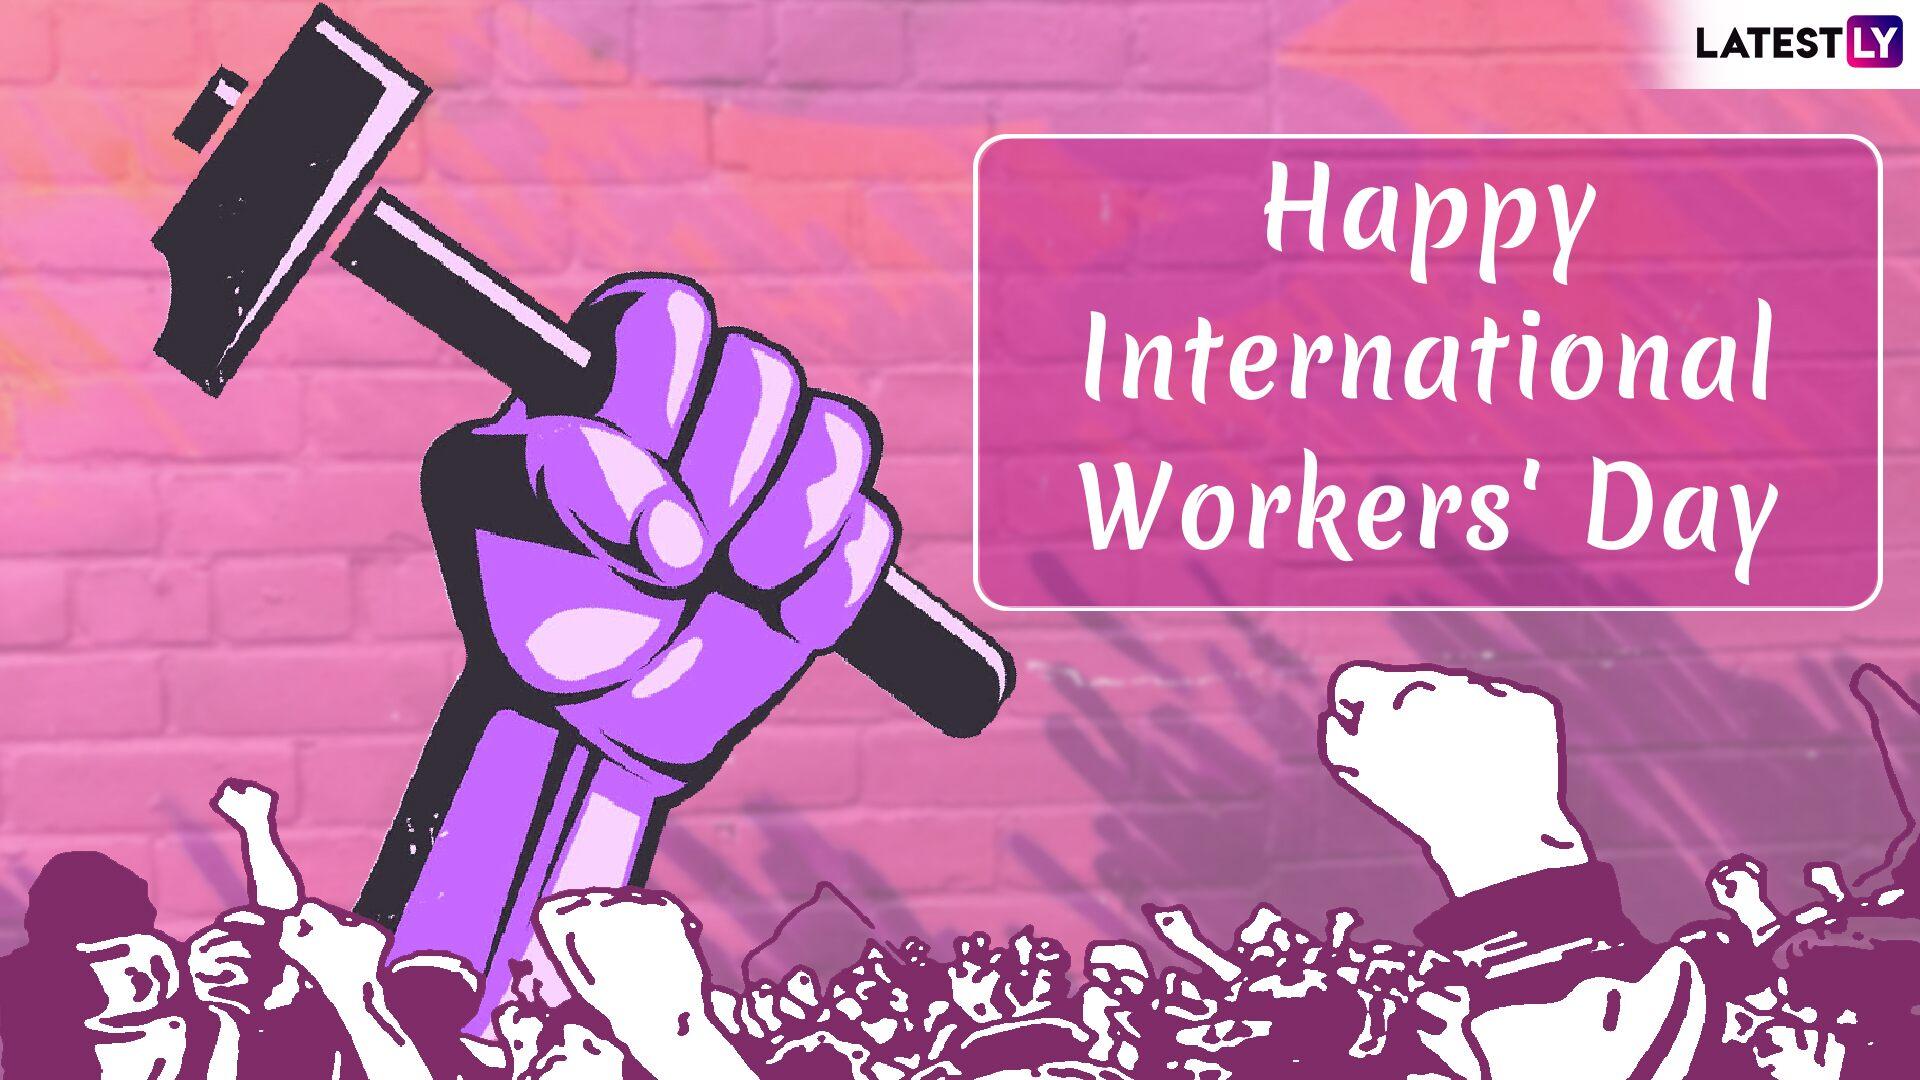 International Workers' Day HD Image With Quotes for Free Download